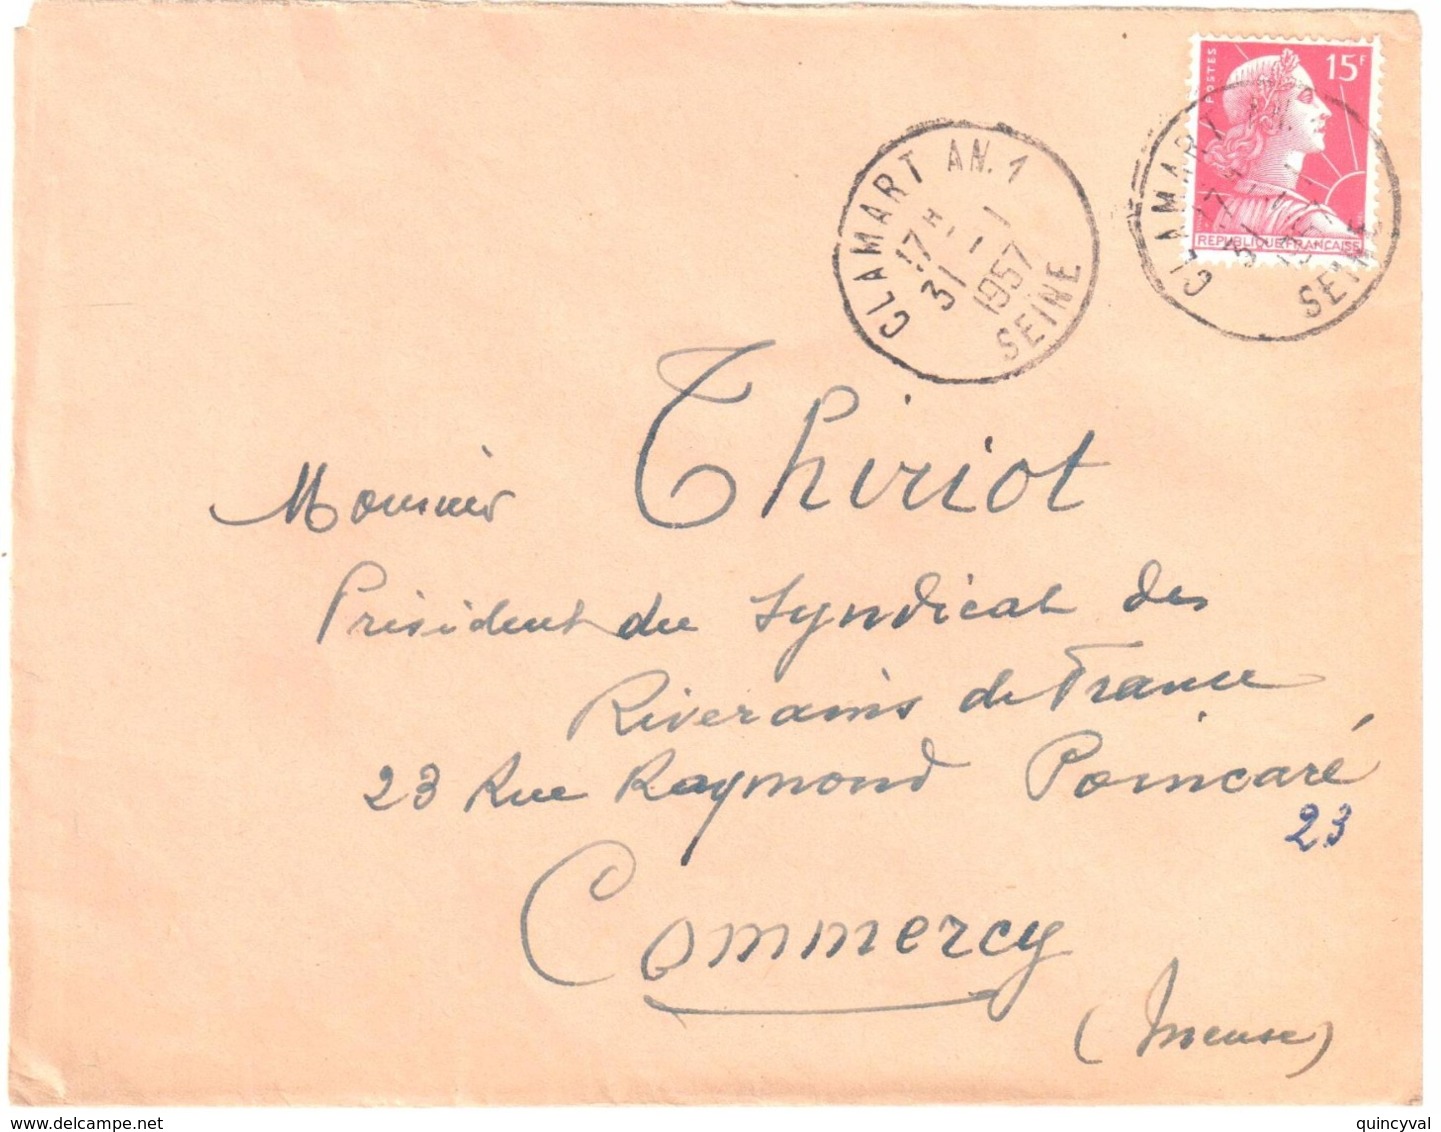 CLAMART AN.1 Seine Lettre 15F Muller Rouge Yv 1011 Ob 31 1 1957 Type A9 Dest Commercy Meuse - Lettres & Documents